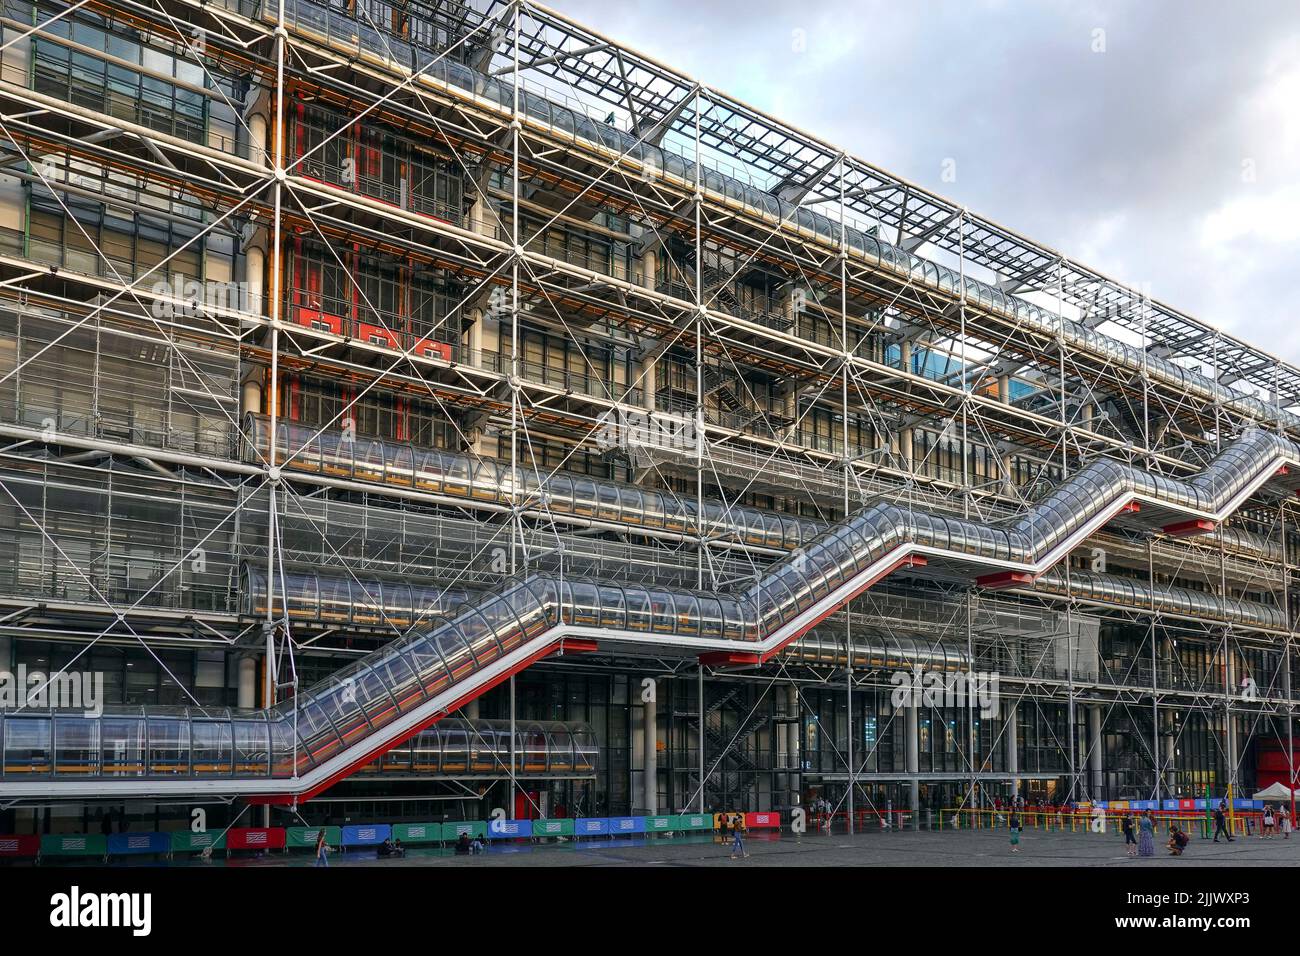 France, Paris, The Centre Pompidou also known as the Pompidou Centre is a complex building in the Beaubourg area of the 4th arrondissement of Paris. I Stock Photo